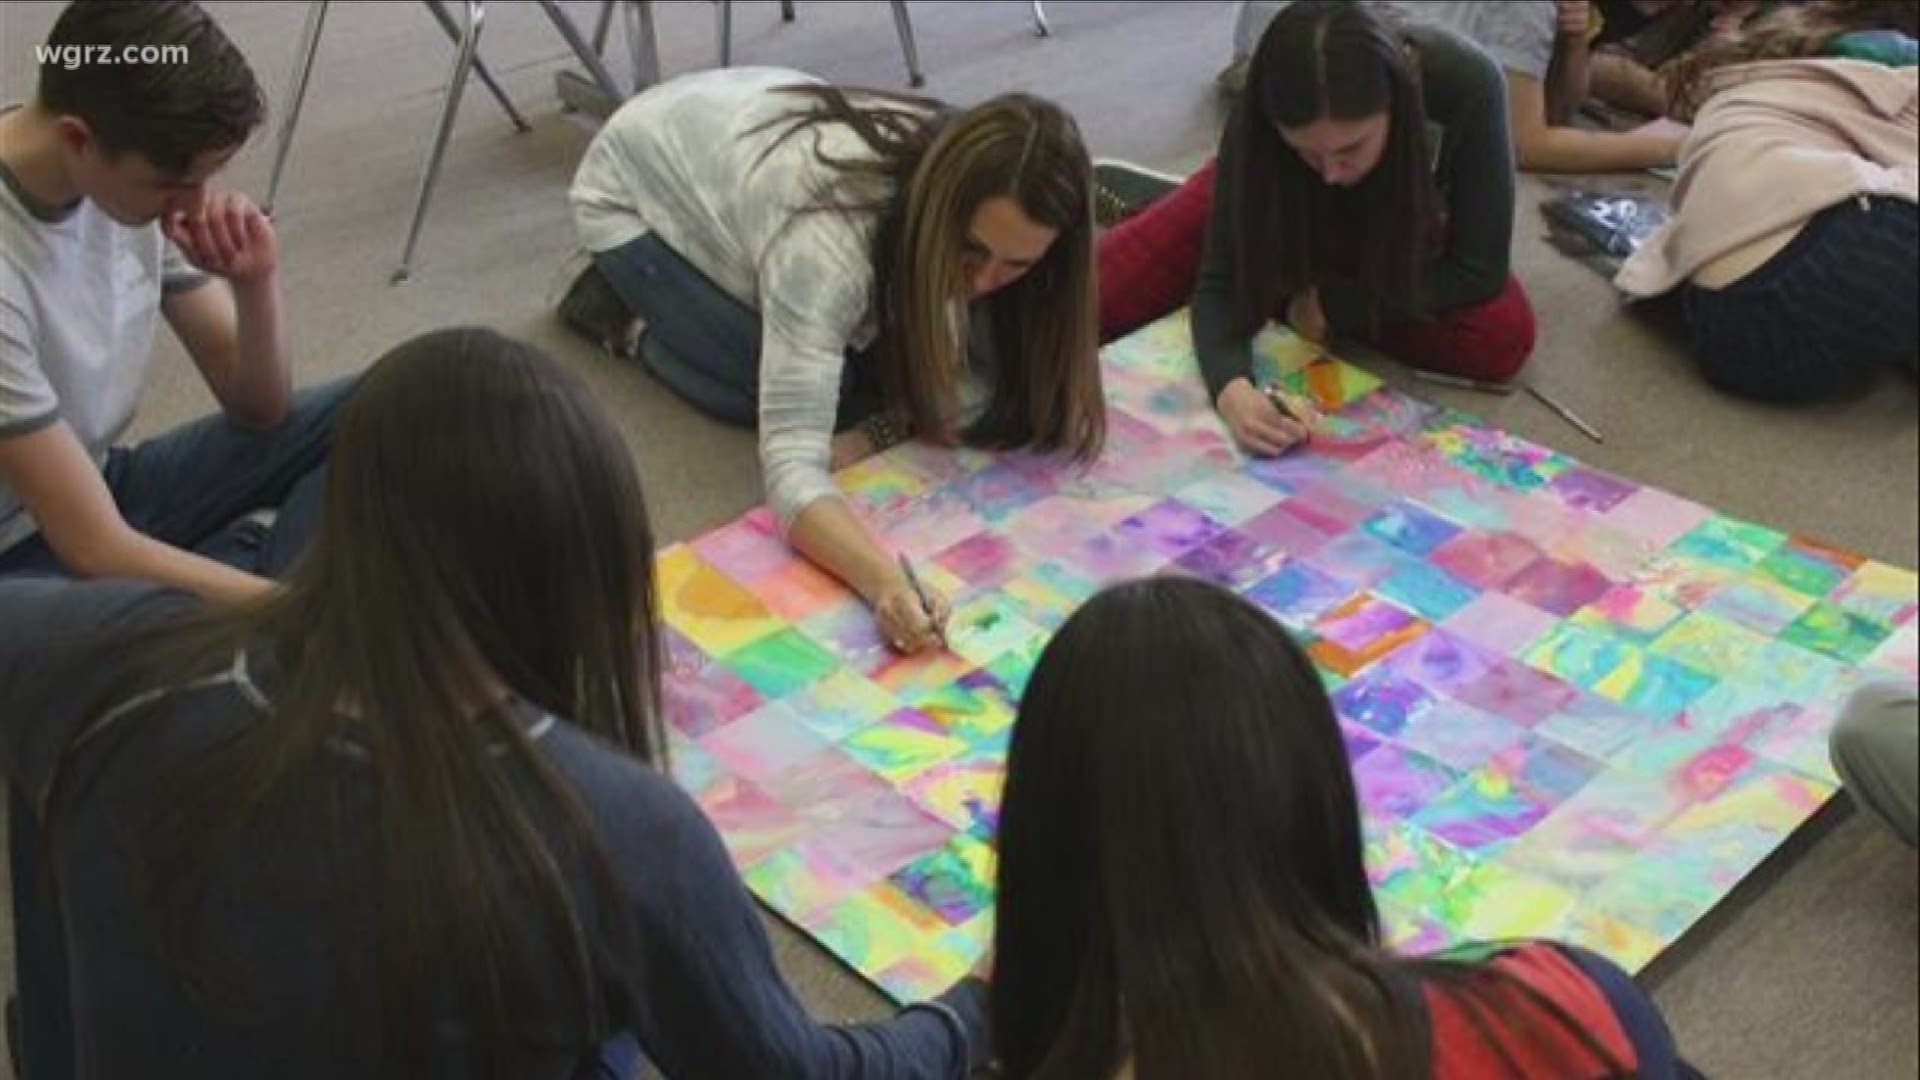 About six-hundred students worked on "A Map of Peace" this school year. The large-scale mural is part of the Healing Arts Program at Oishei Children's Hospital.